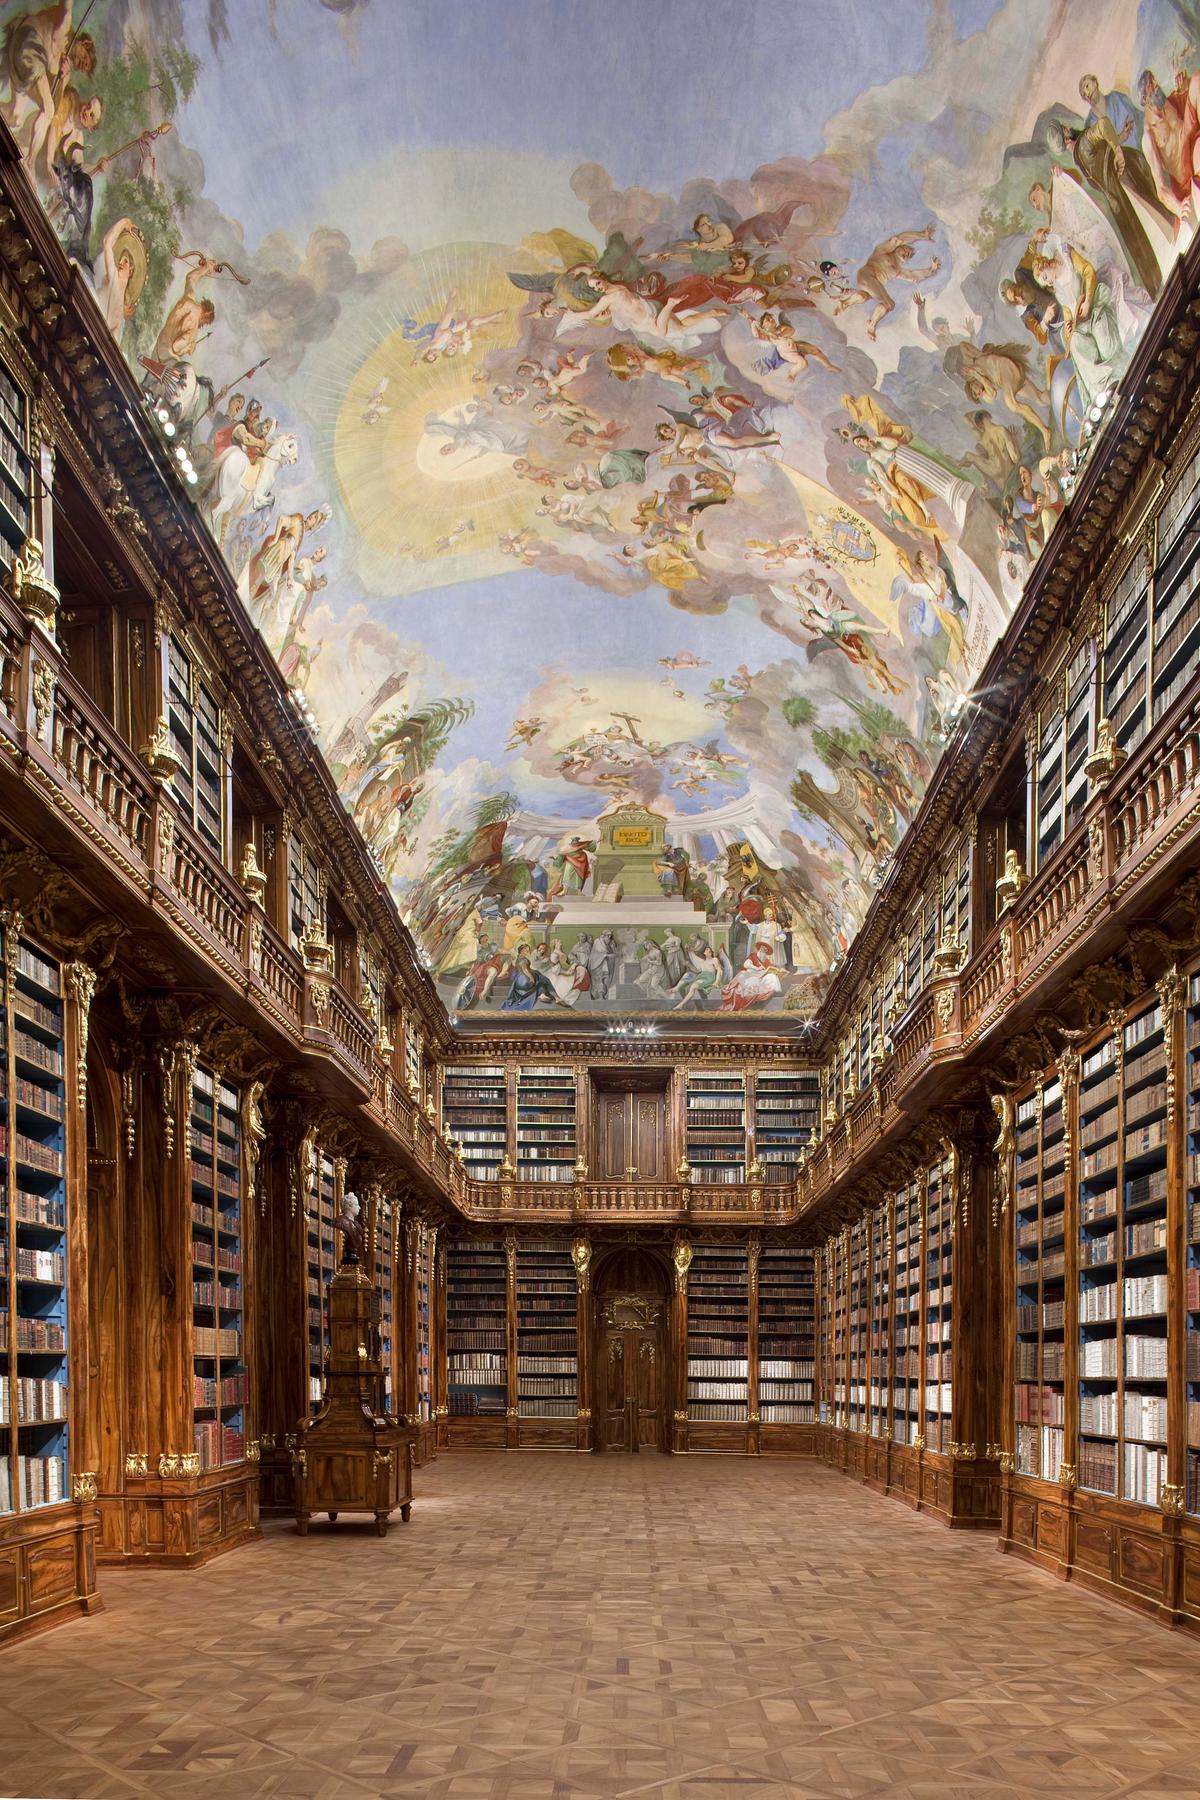 The Philosophical Hall at Strahov monastery and library. (Photo courtesy of <a href="https://www.strahovskyklaster.cz/en/">Strahov monastery</a>)